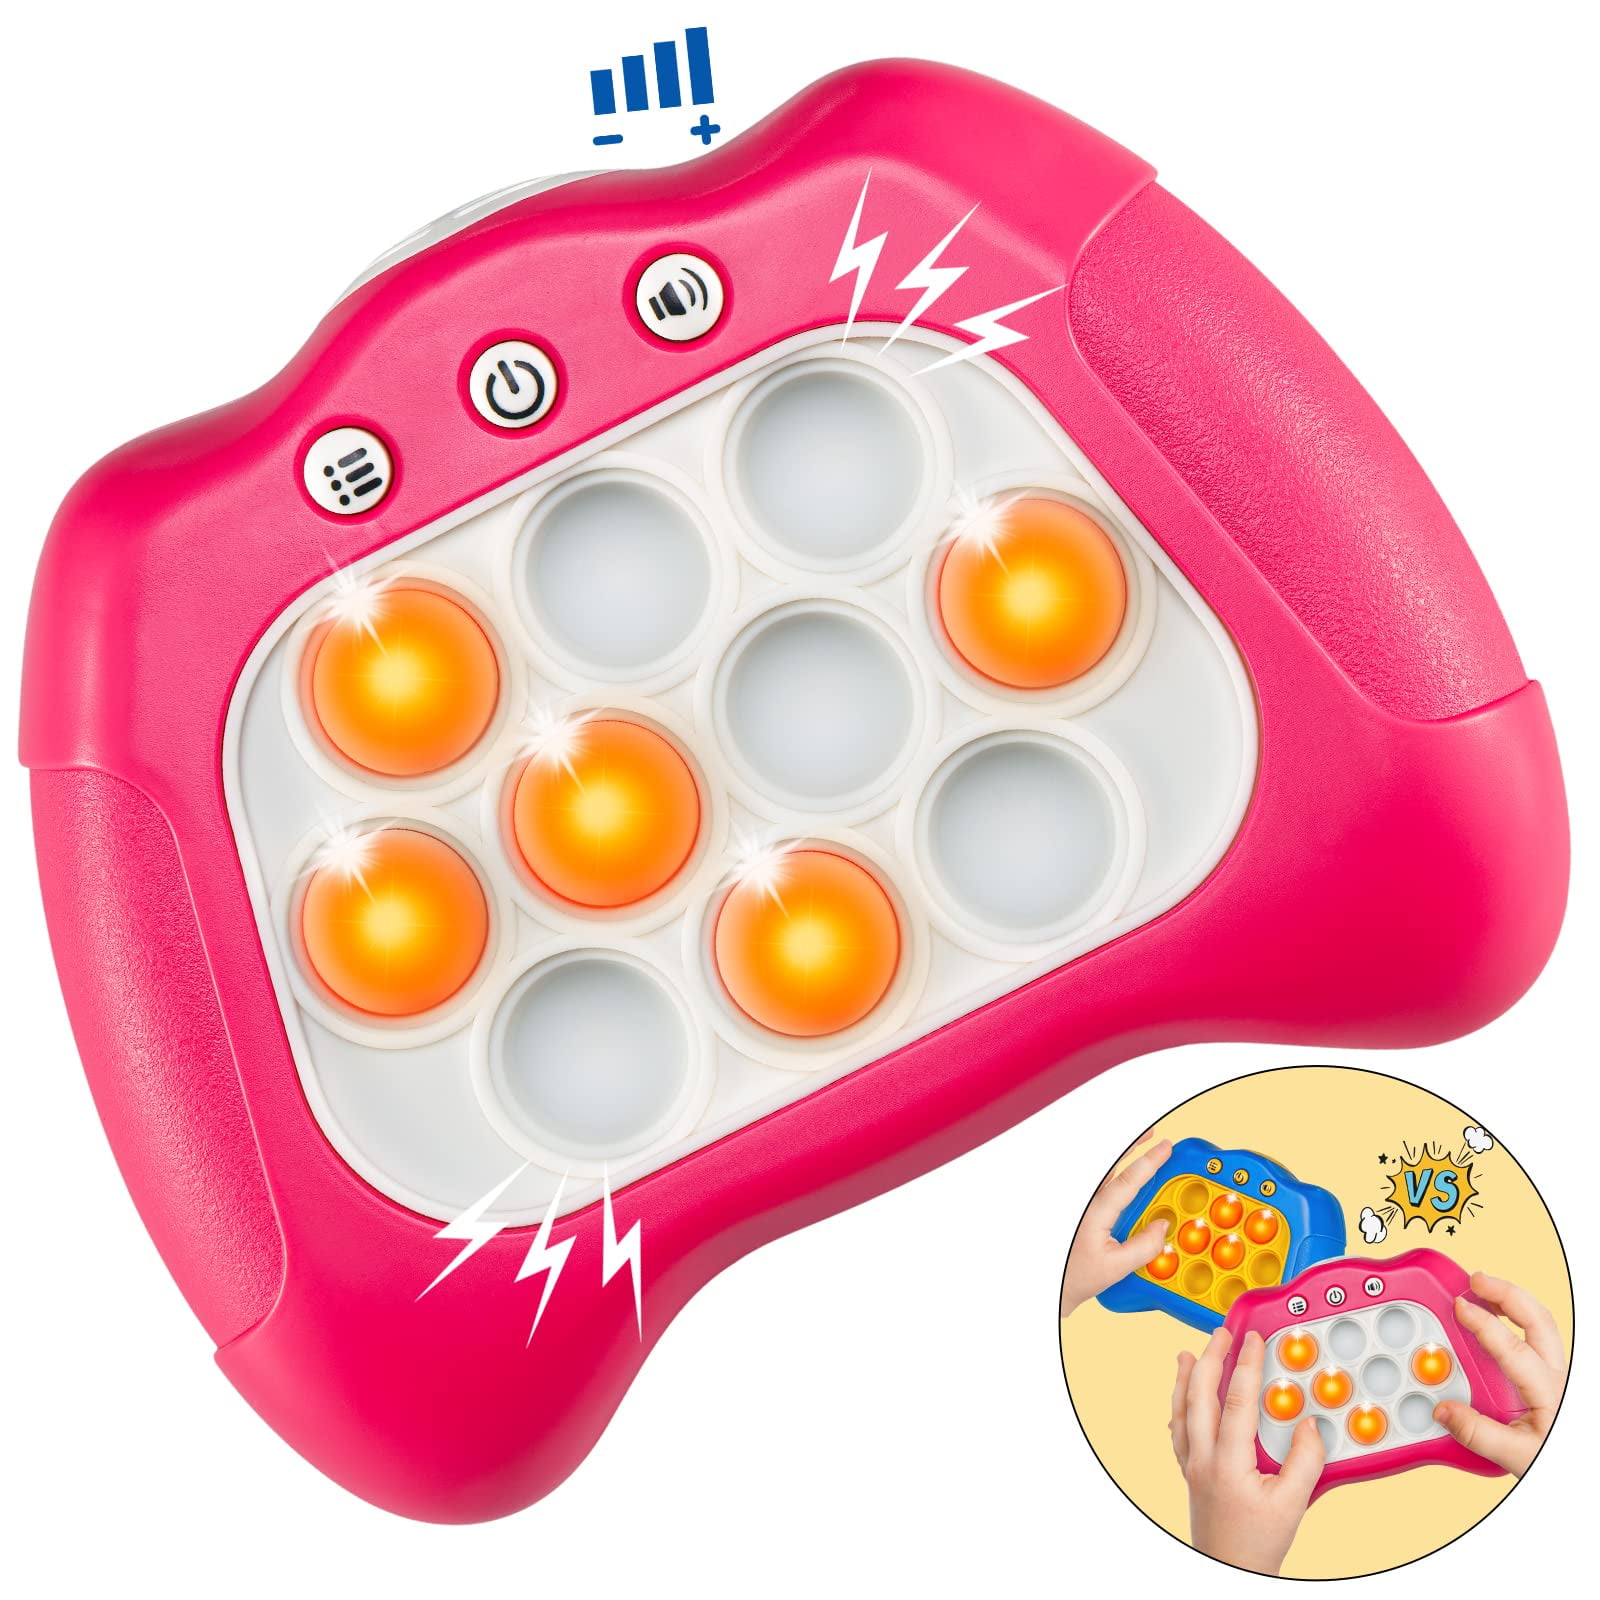 ORDTBY Handheld Travel Pop It Pro Games for Kids Electronic Fidgets Games  Boy Girl, Gift for3 4 5 6 7 8 Year Old Boys Birthday Xmas, Light Up Pop It